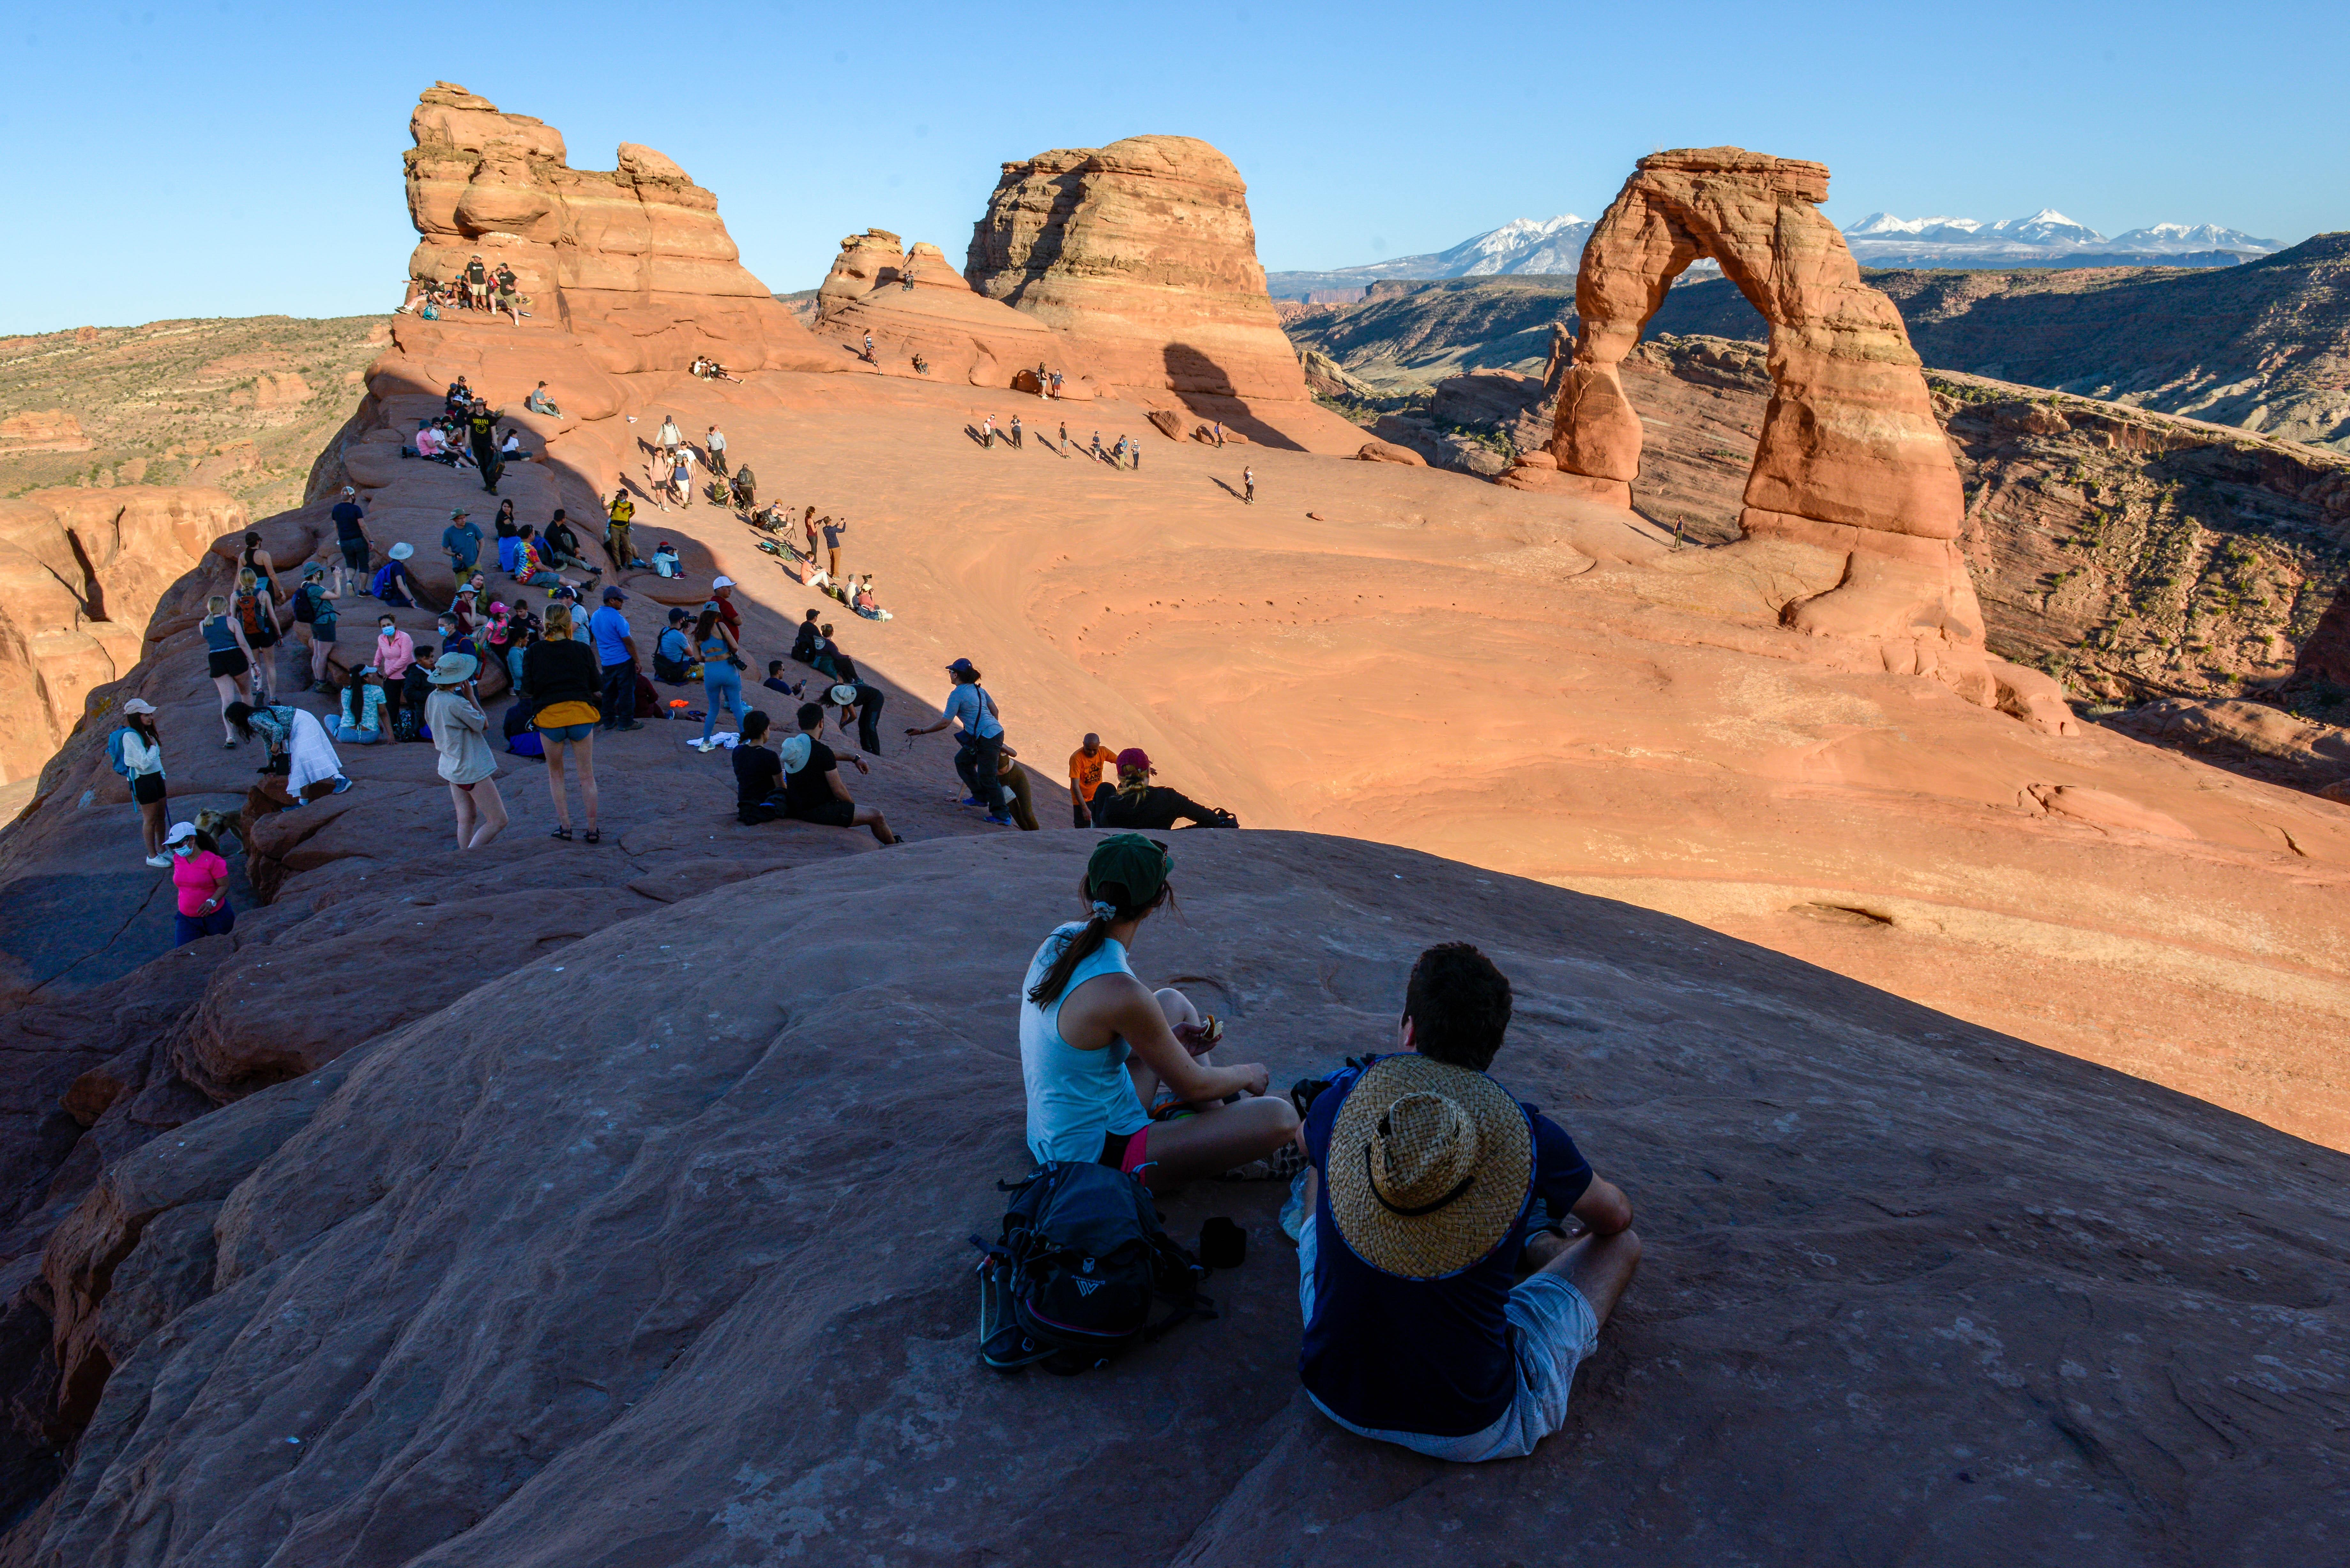 A crowd of people sit and watch the sunset at delicate arch.